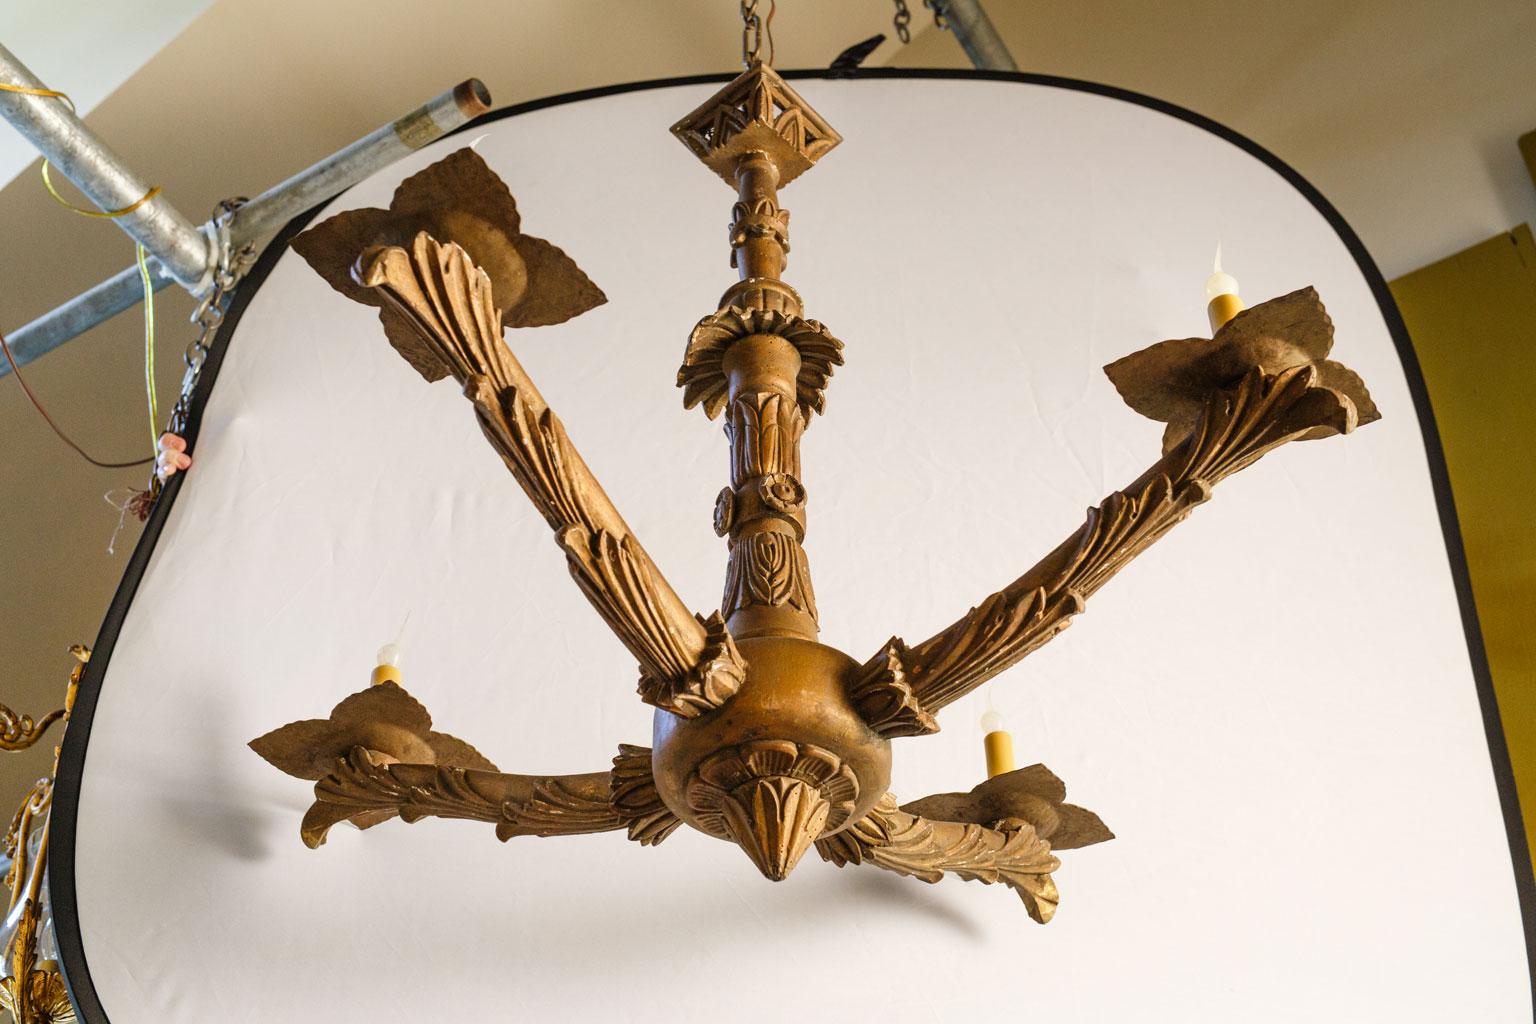 Hand carved giltwood chandelier, circa 1860-1880, Italy. Four arms with candelabra-size lights on later tole bobeche. Includes chain and a canopy. Newly wired for use within the USA. The carving is quite nice and the shape is beautiful.